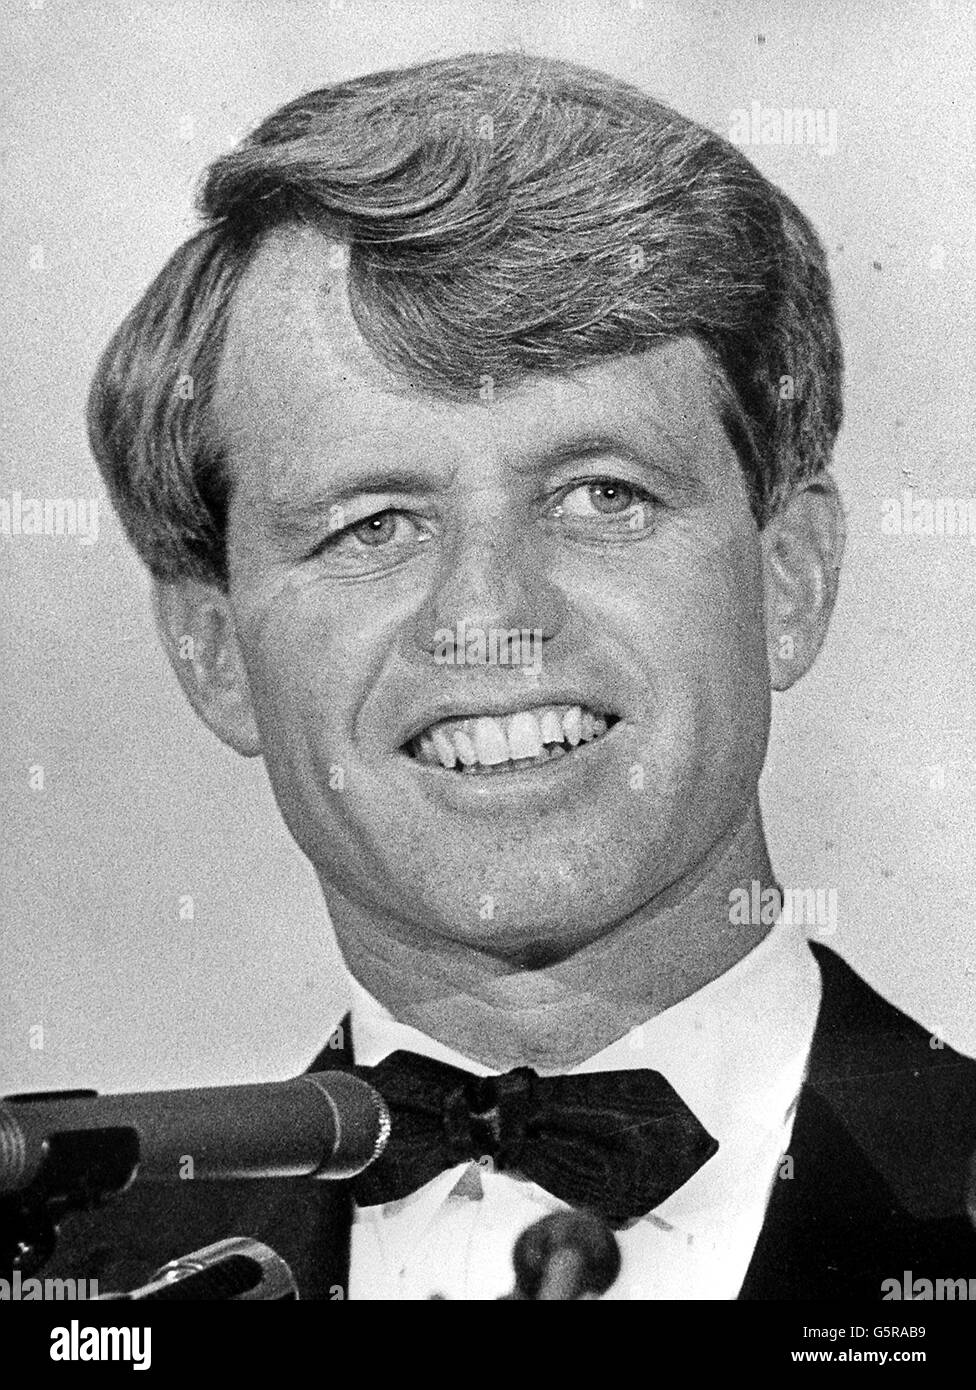 5th JUNE: On this day in 1968 US Senator Robert Kennedy, brother of former president John F Kennedy, was shot by a Jordanian-born immigrant in Los Angeles whilst he was campaigning for presidential nomination. US Senator Robert Kennedy. June 1968. Stock Photo